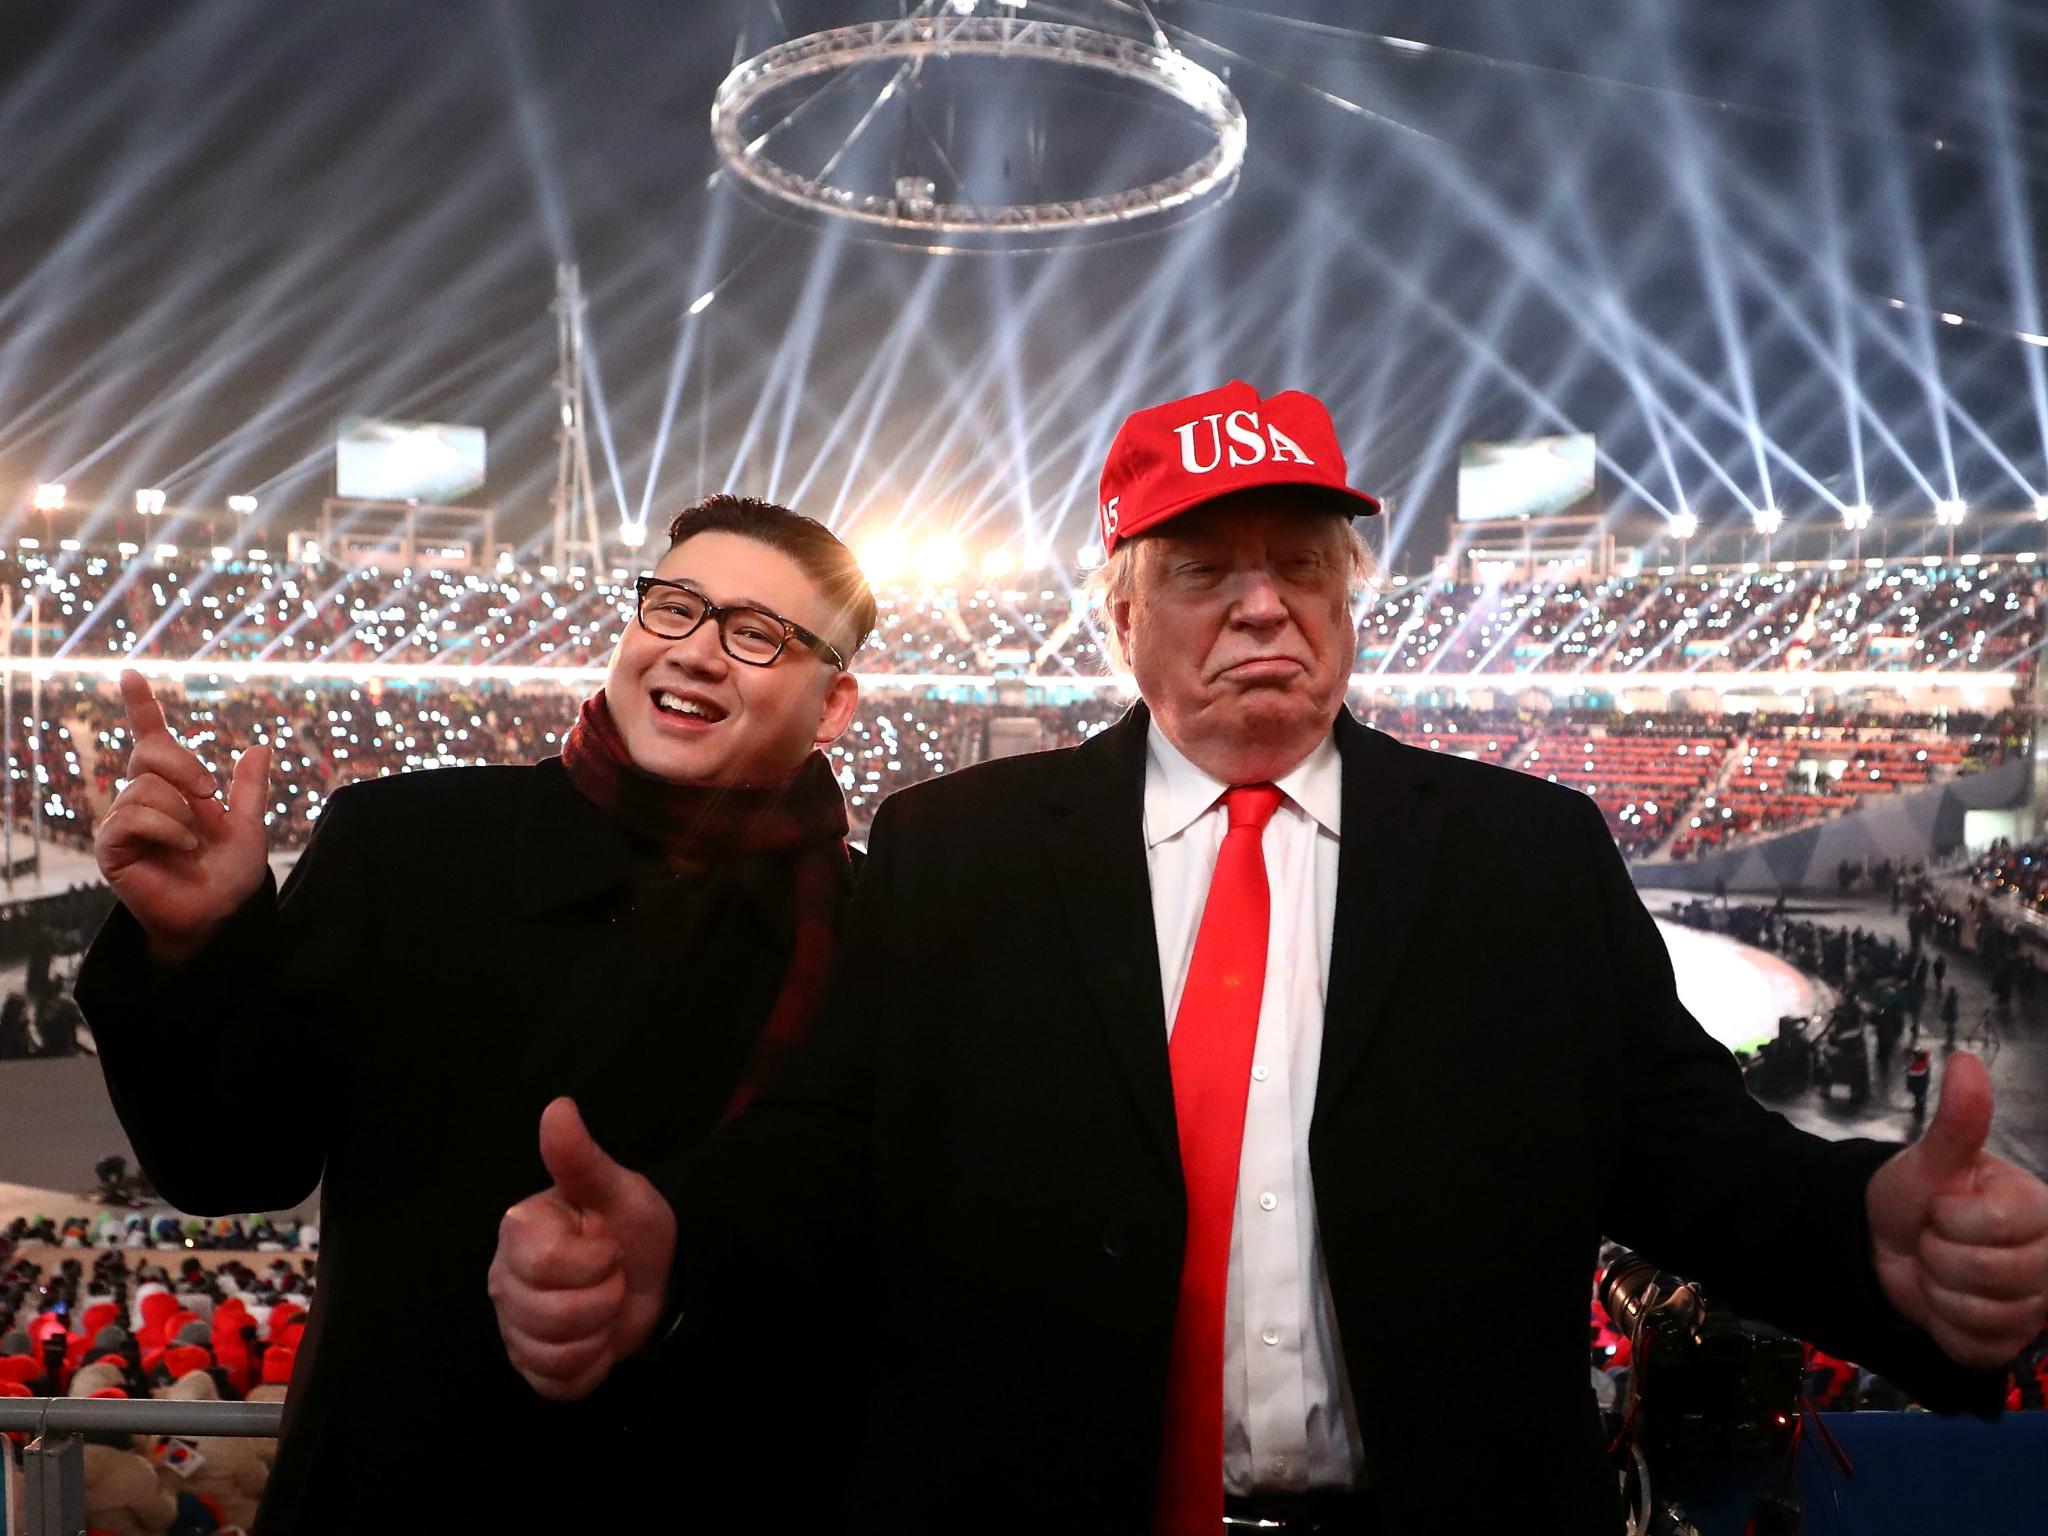 Impersonators of Donald Trump and Kim Jong Un pose during the Opening Ceremony of the PyeongChang 2018 Winter Olympic Games on 9 February 2018